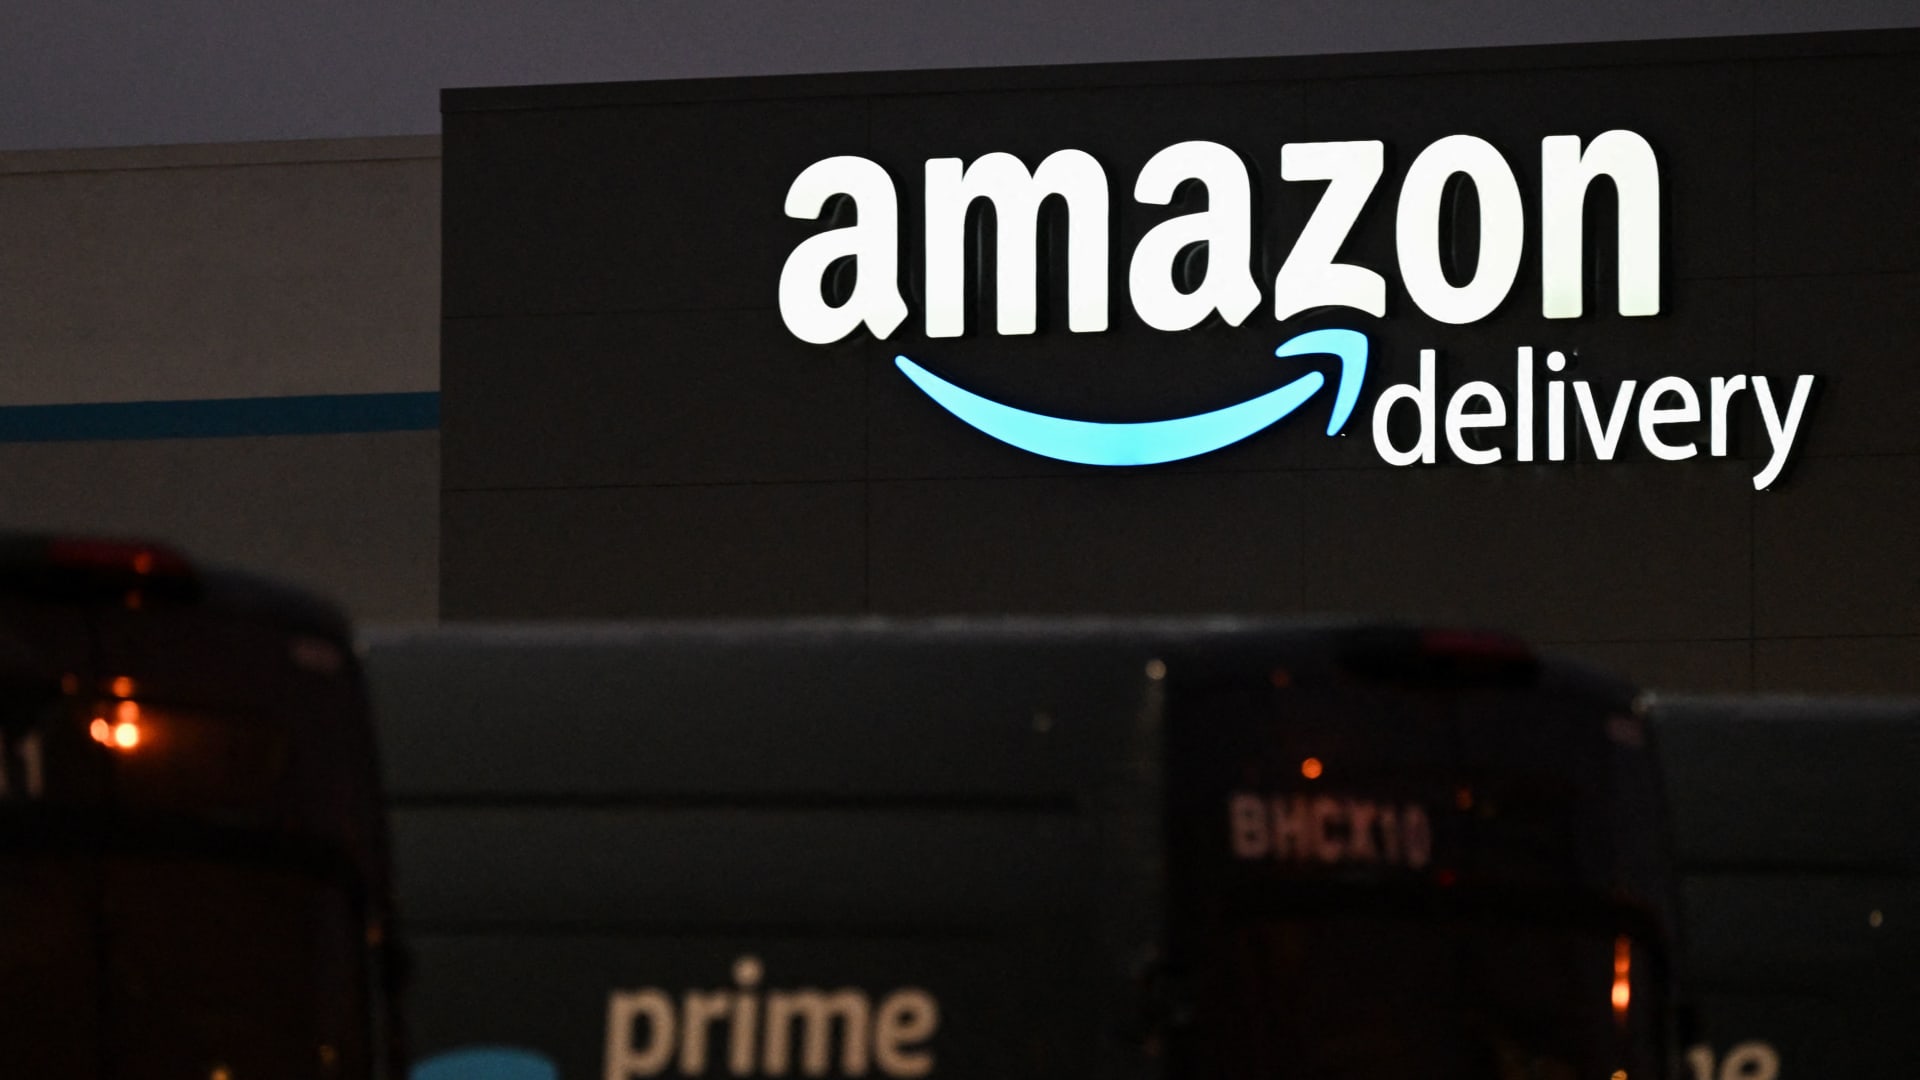 We’re delighted Amazon’s second Prime Day promises to boost sales ahead of the holidays